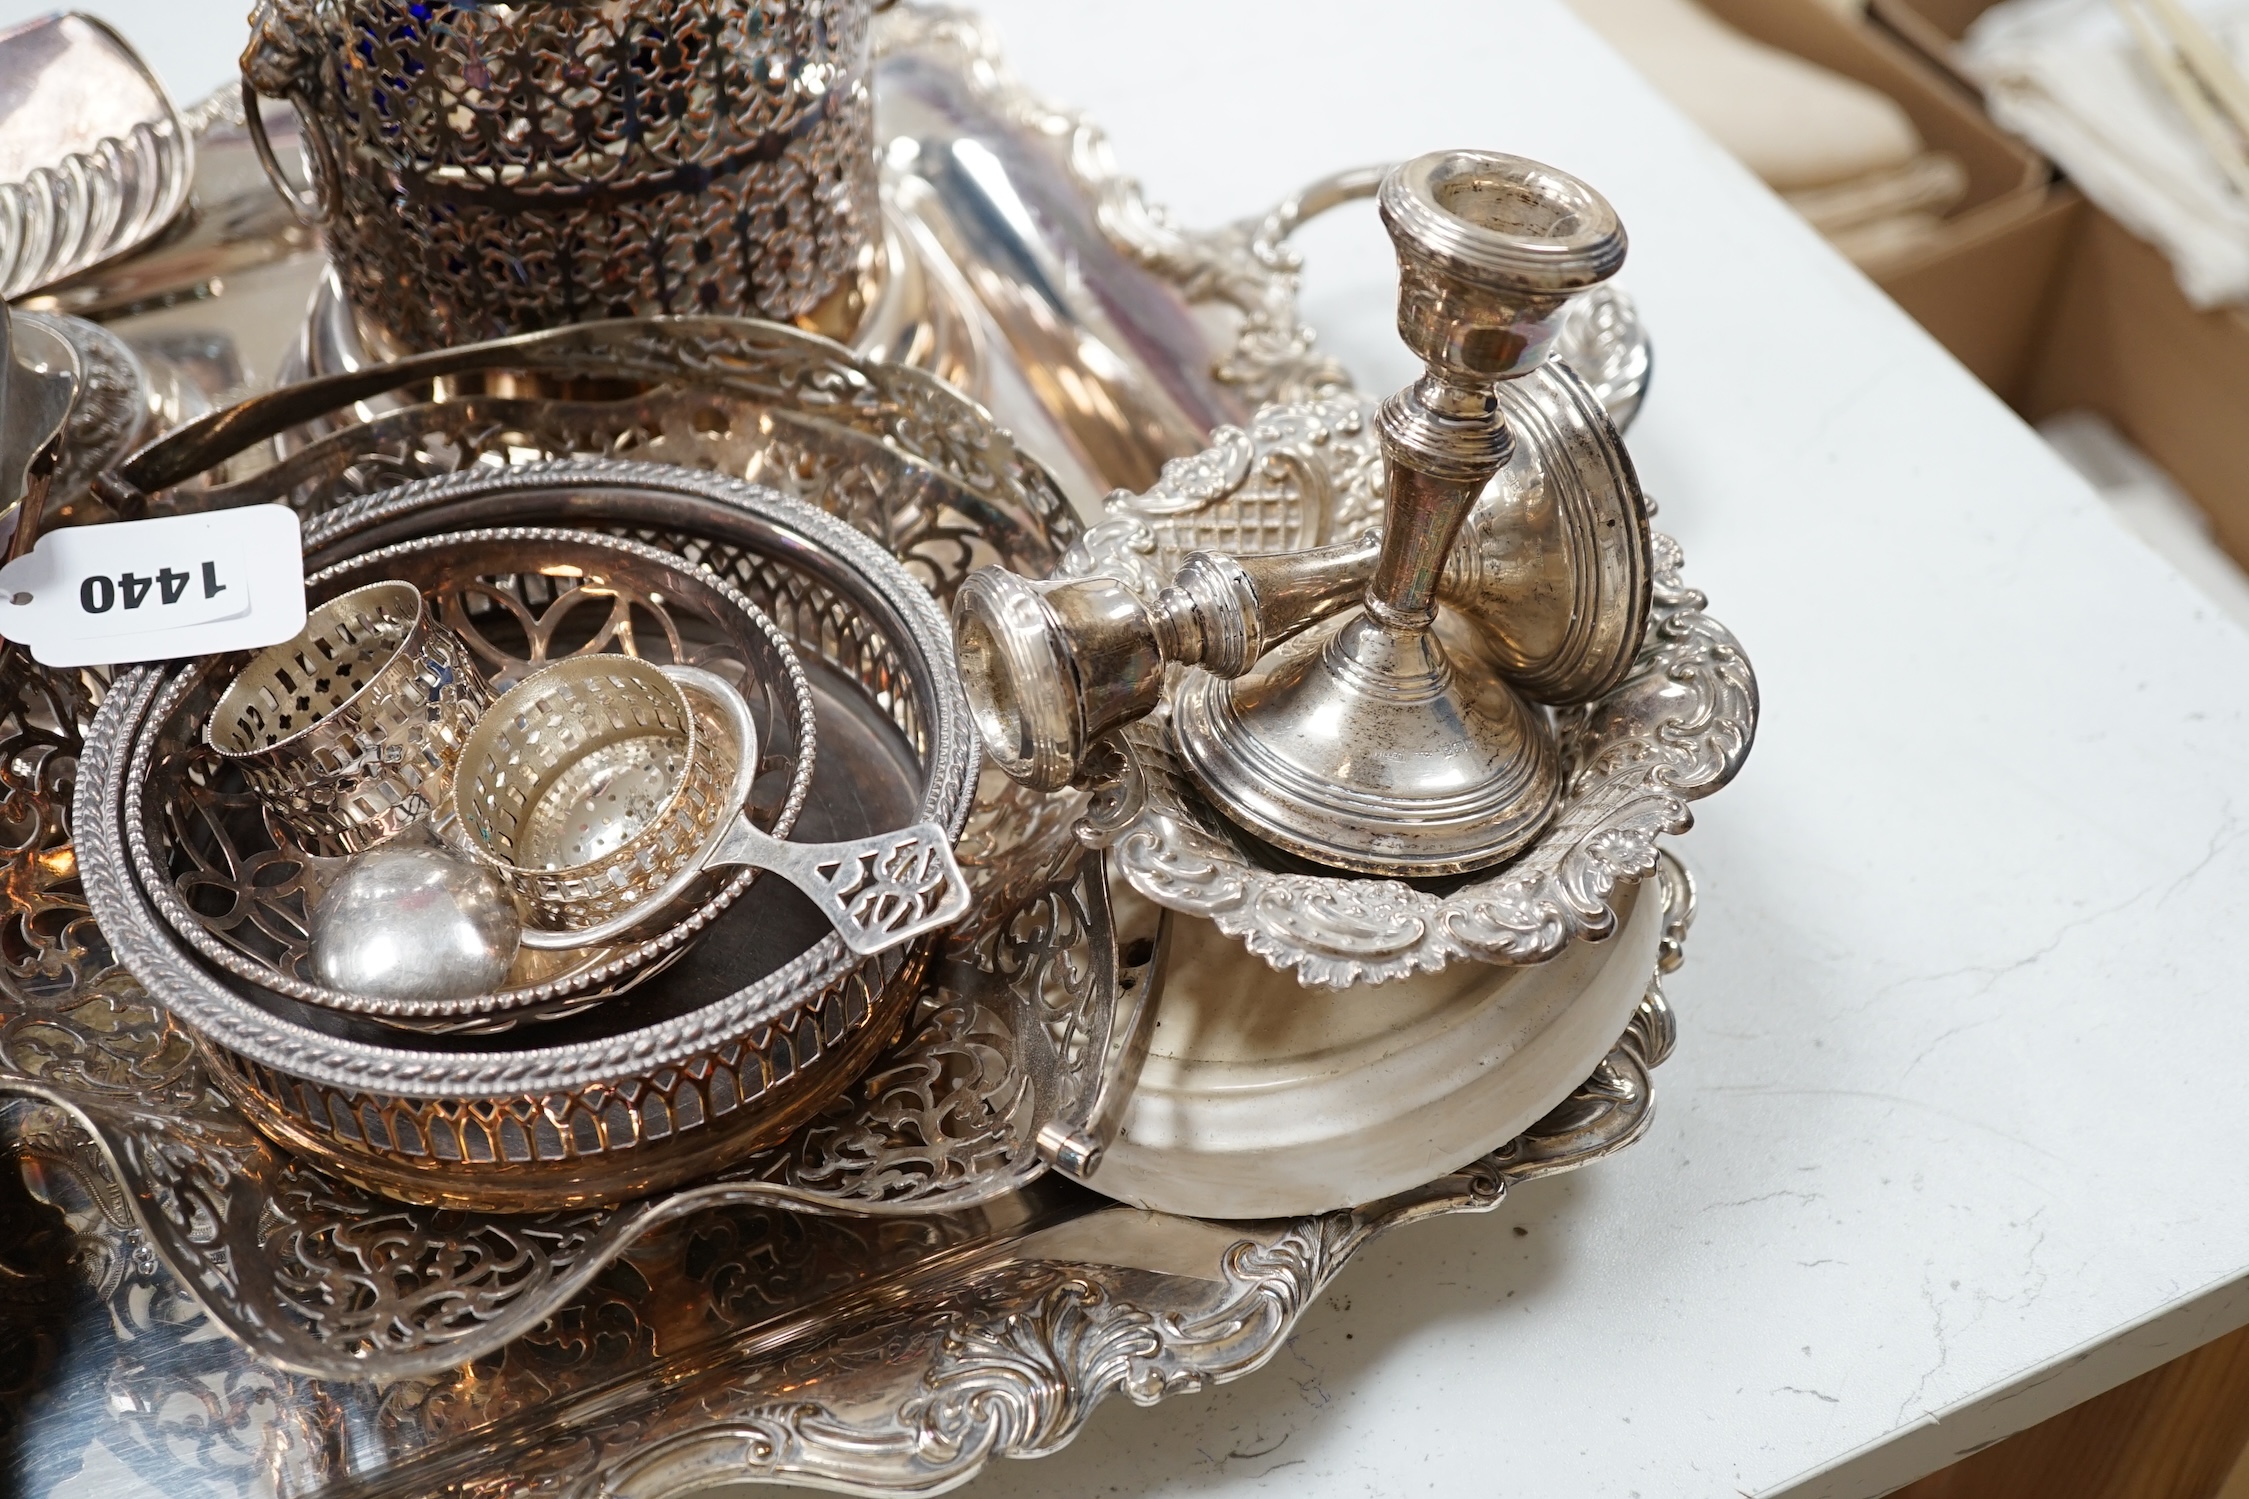 A group of plated wares